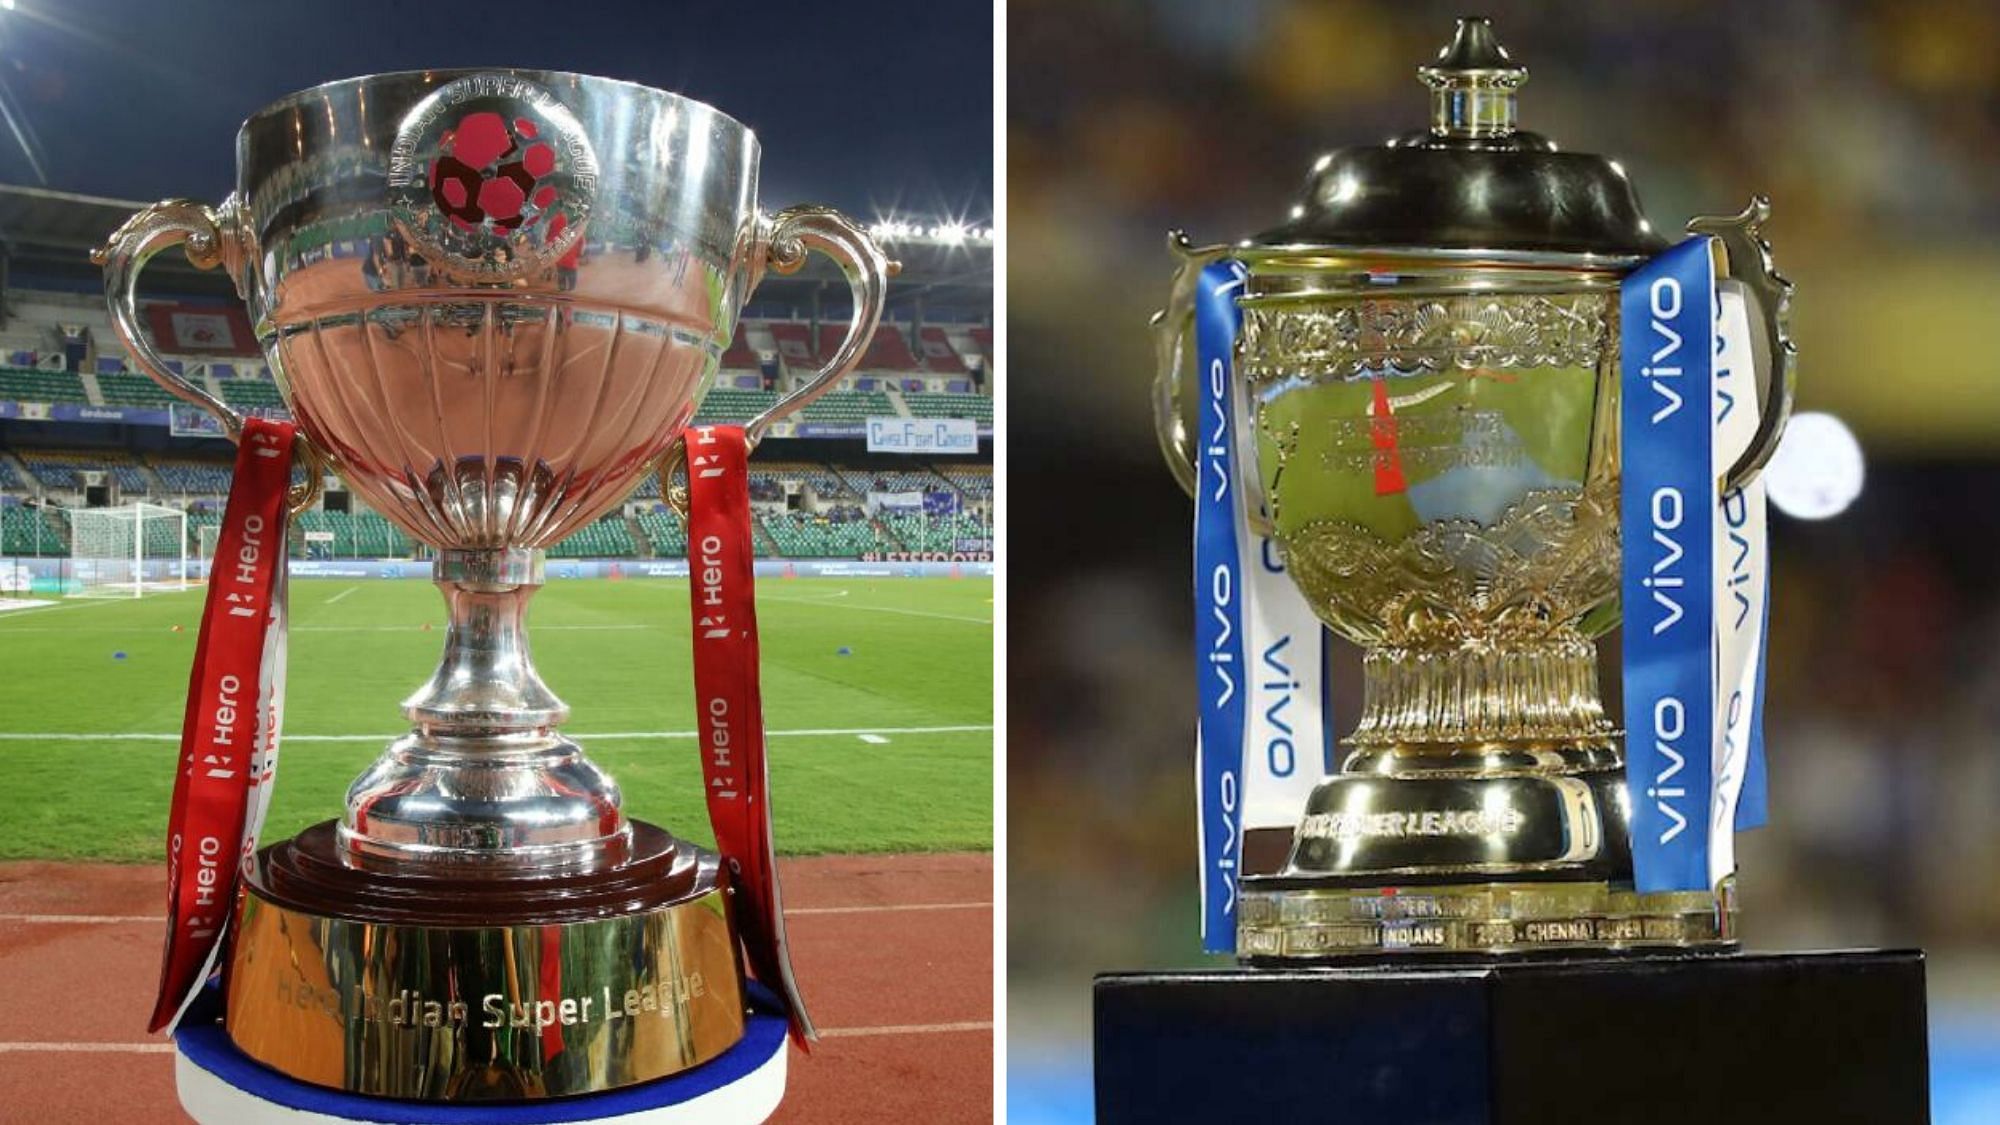 Indian Super League final and the 13th edition of the Indian Premier League have affected by the coronavirus outbreak.